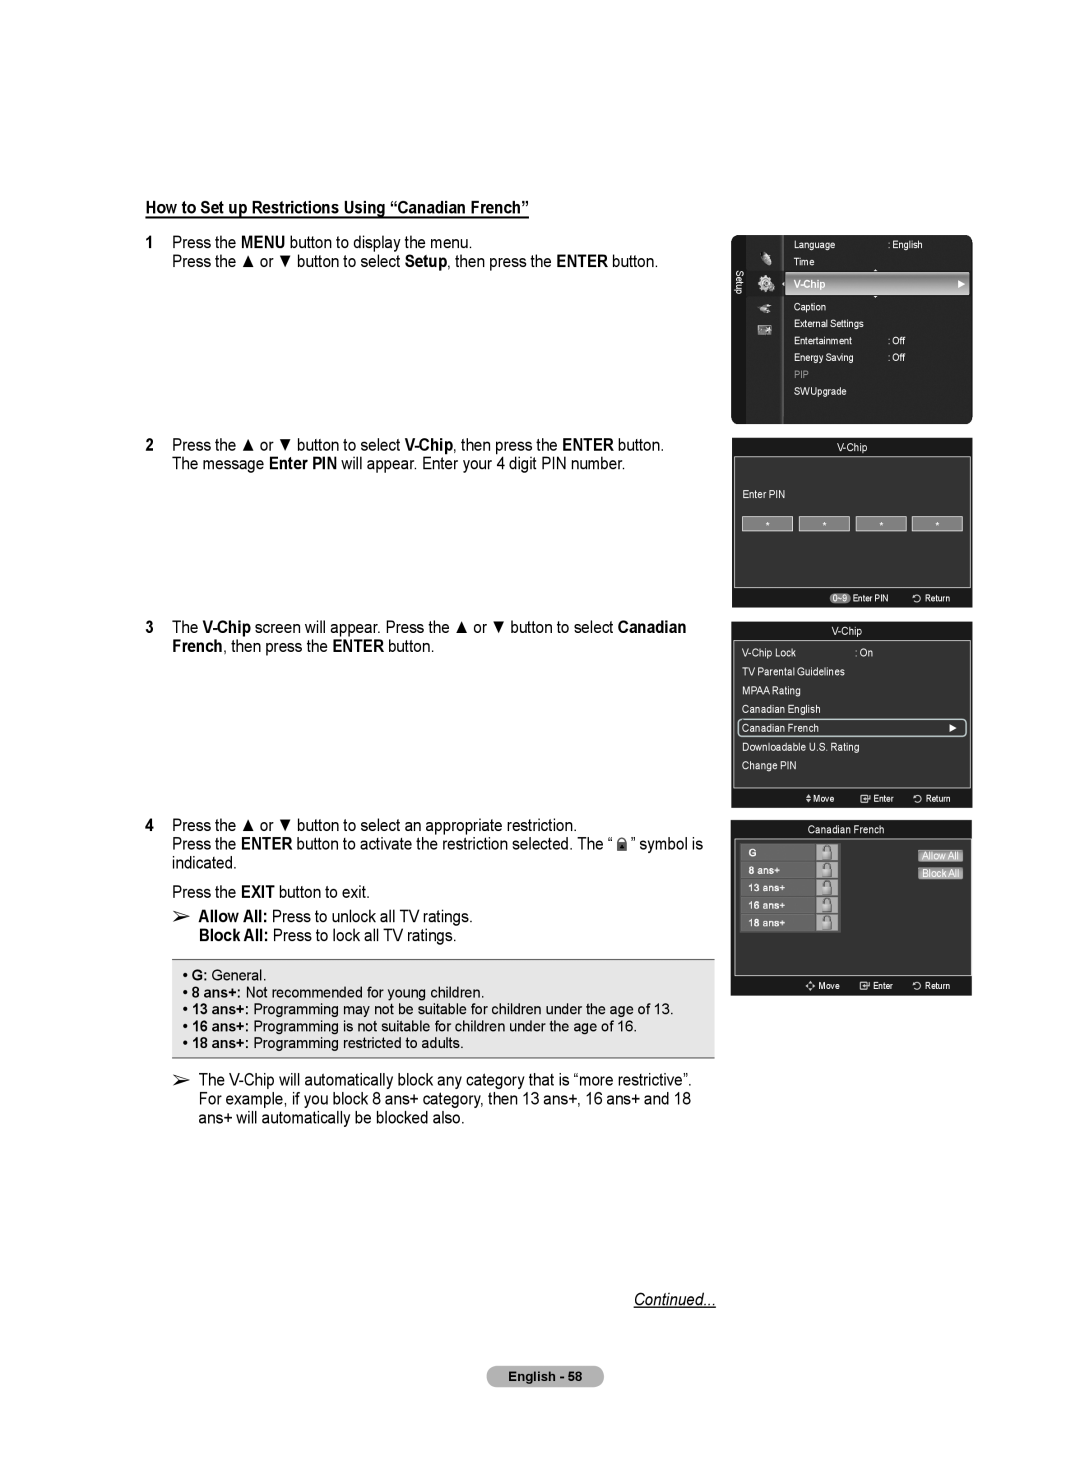 Samsung 510 user manual How to Set up Restrictions Using “Canadian French”, Continued 